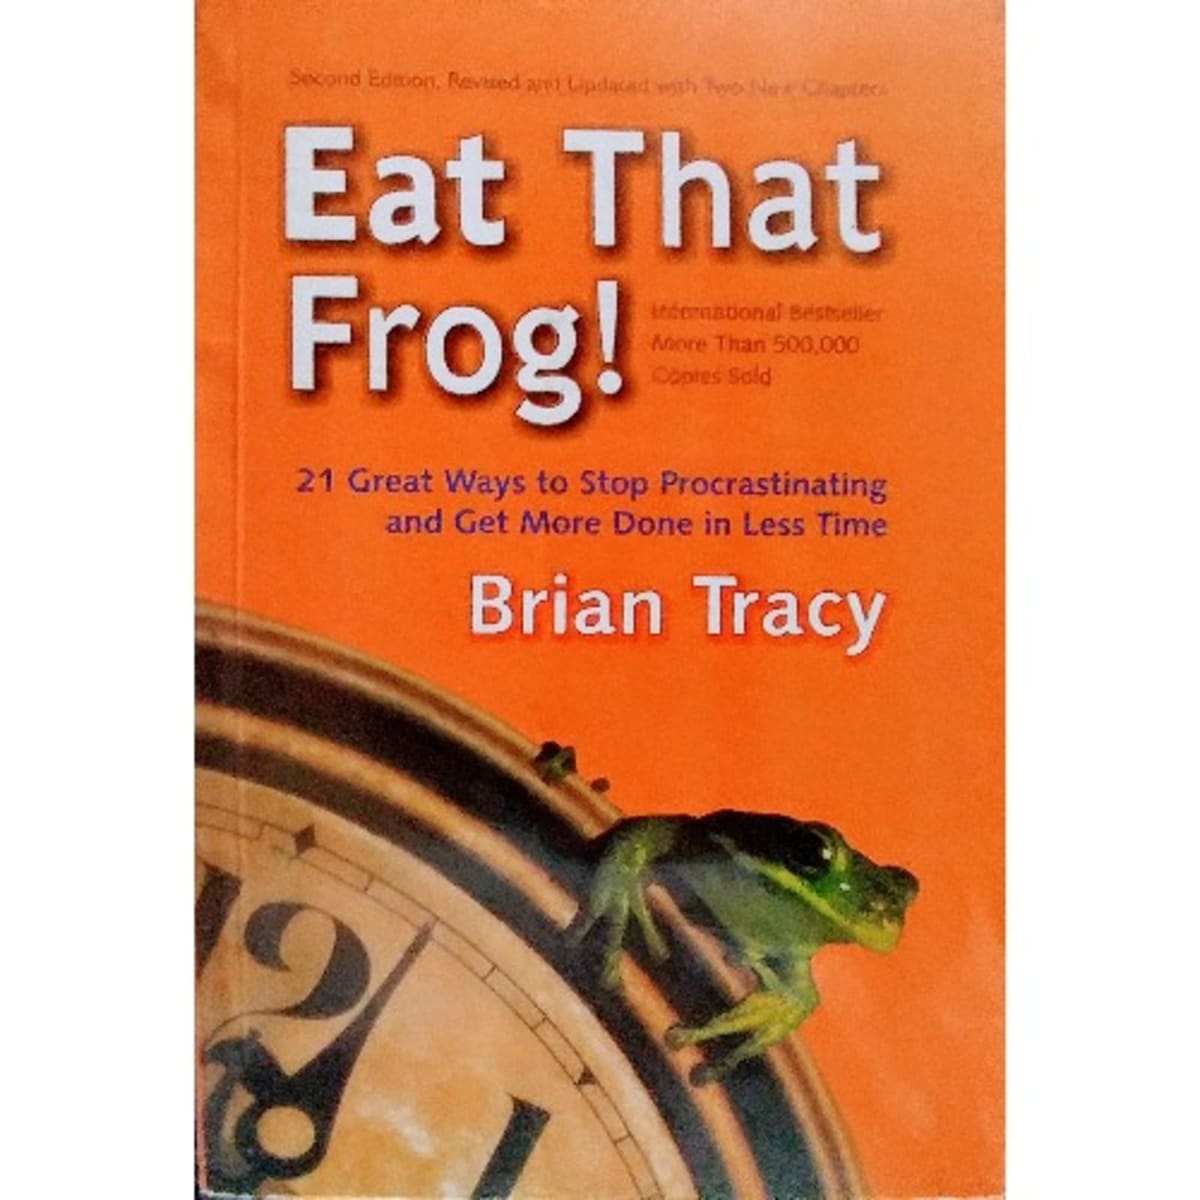 Eat　Time　In　That　Shopping　Done　More　Frog!:　Less　And　21　Procrastinating　Great　Stop　Ways　To　Online　Br　Get　By　Konga